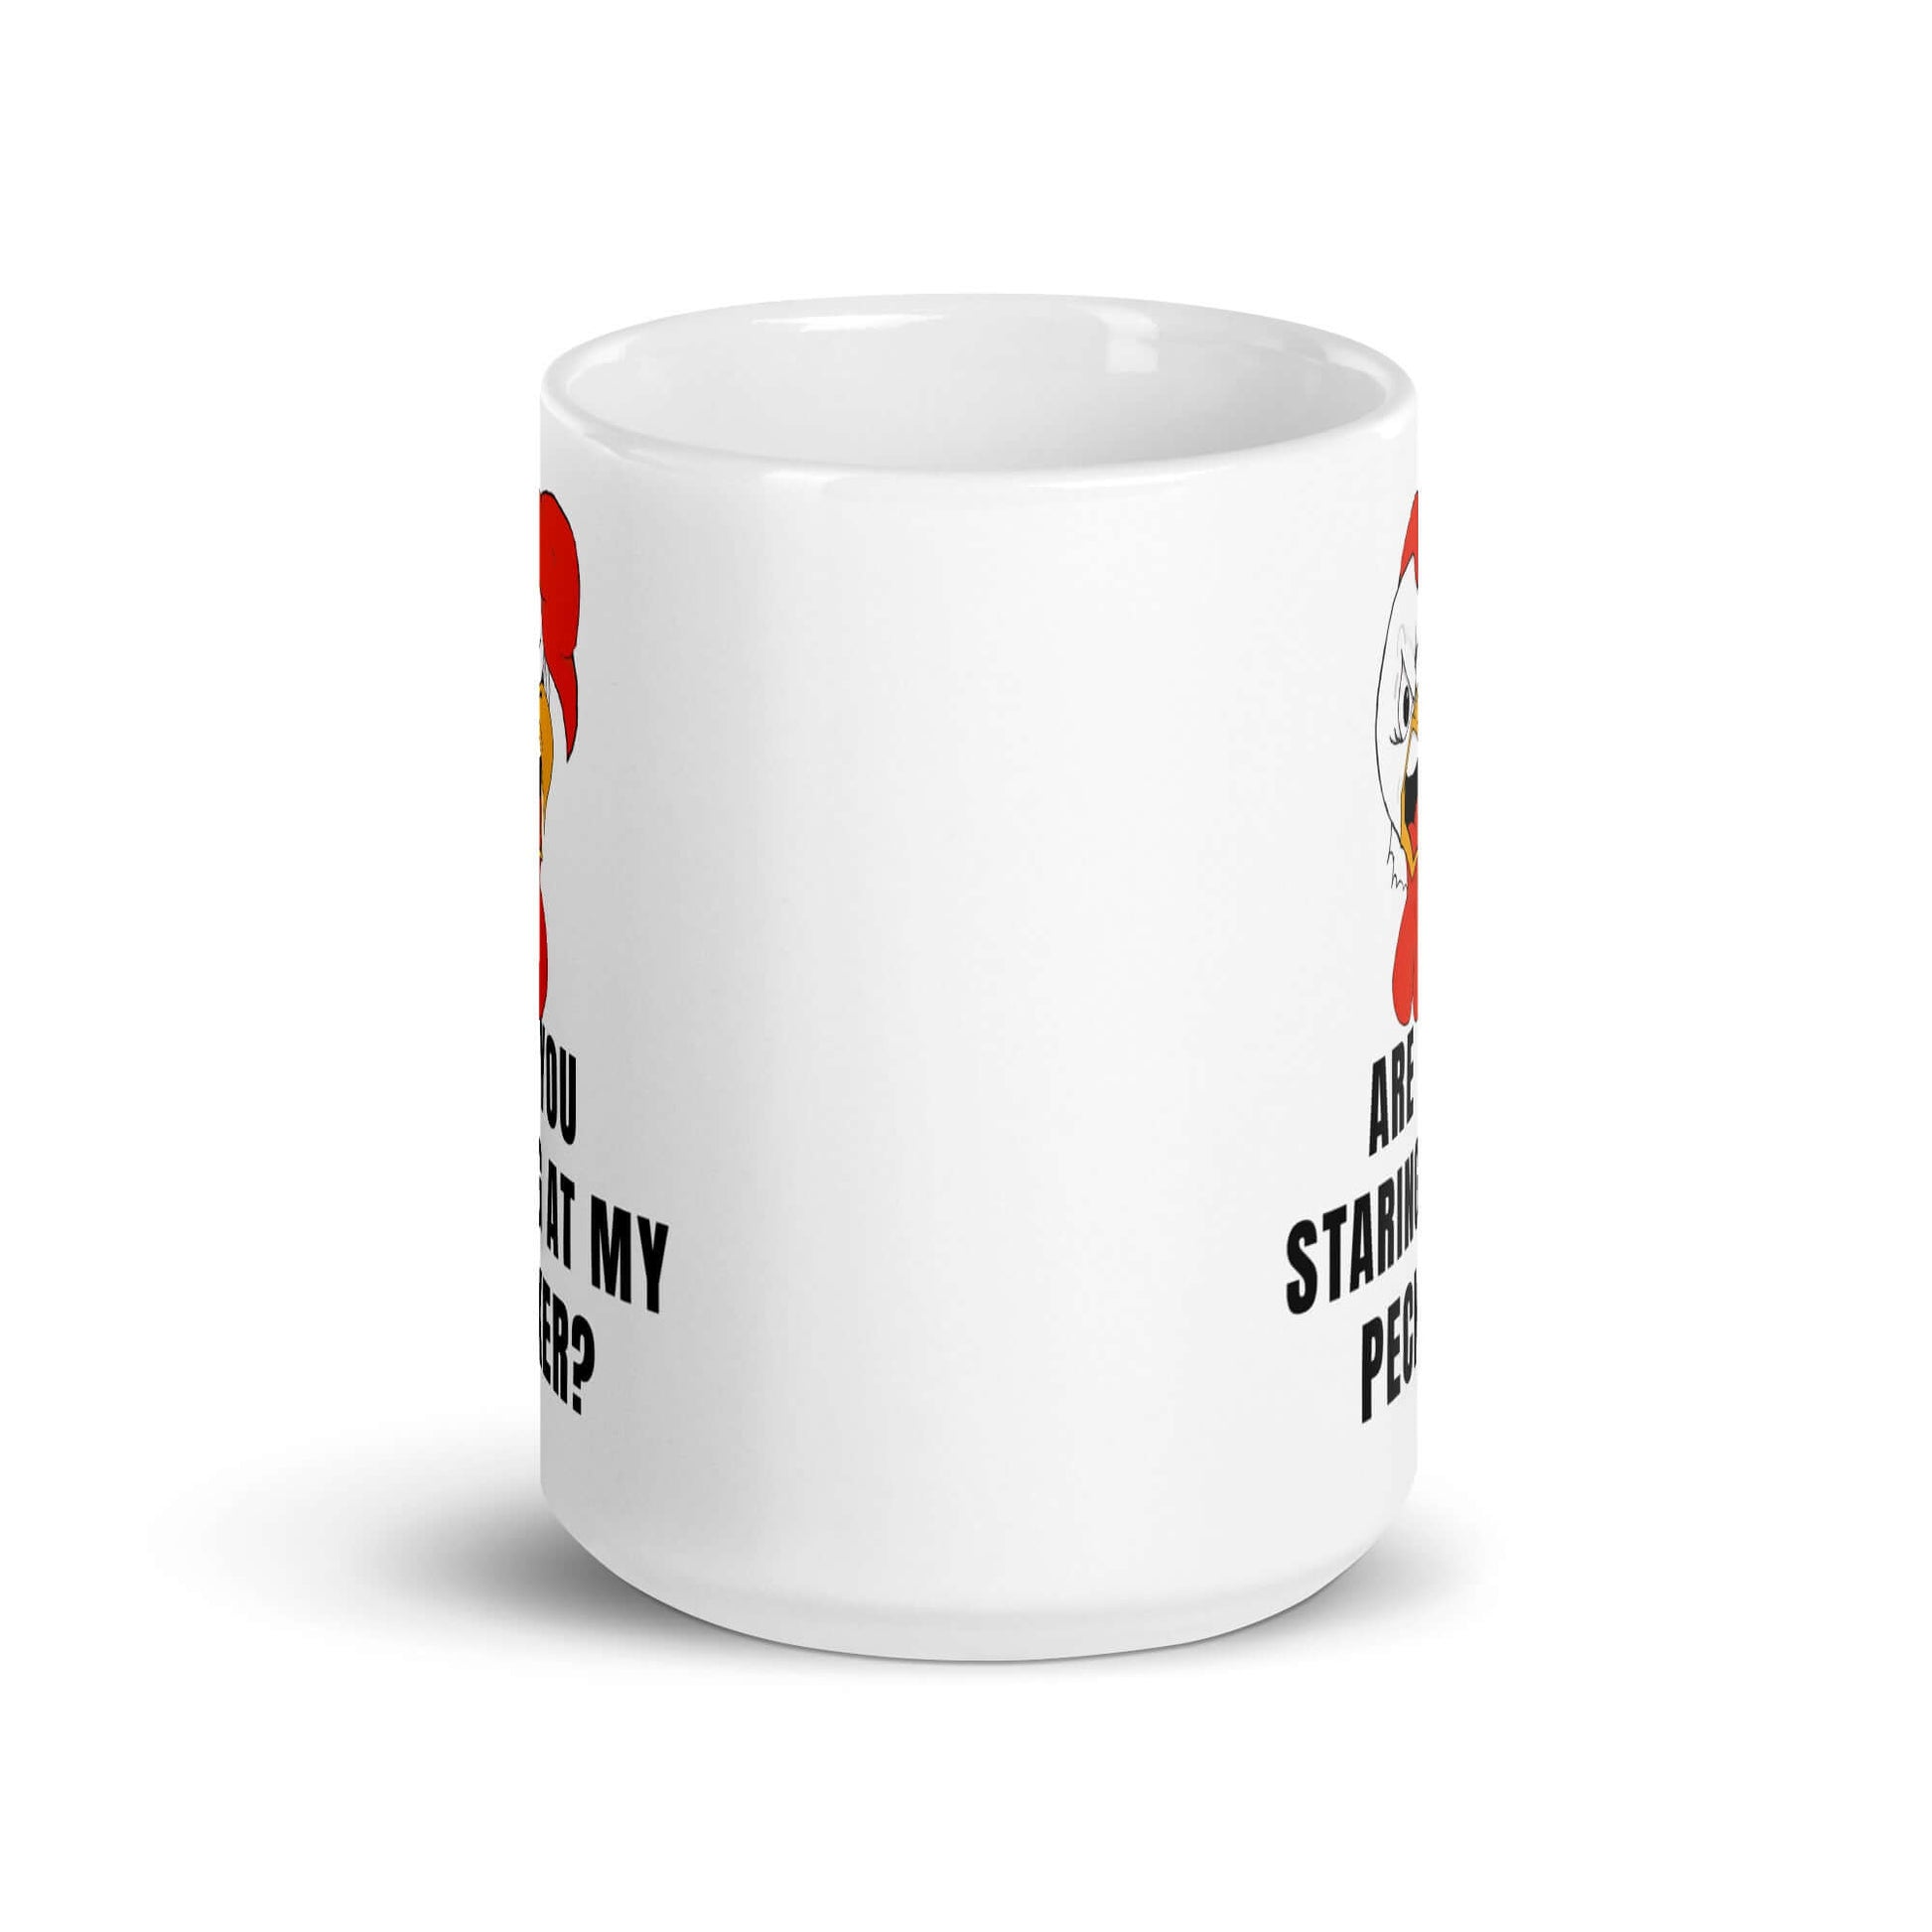 Are you staring at my pecker - White glossy mug - Horrible Designs